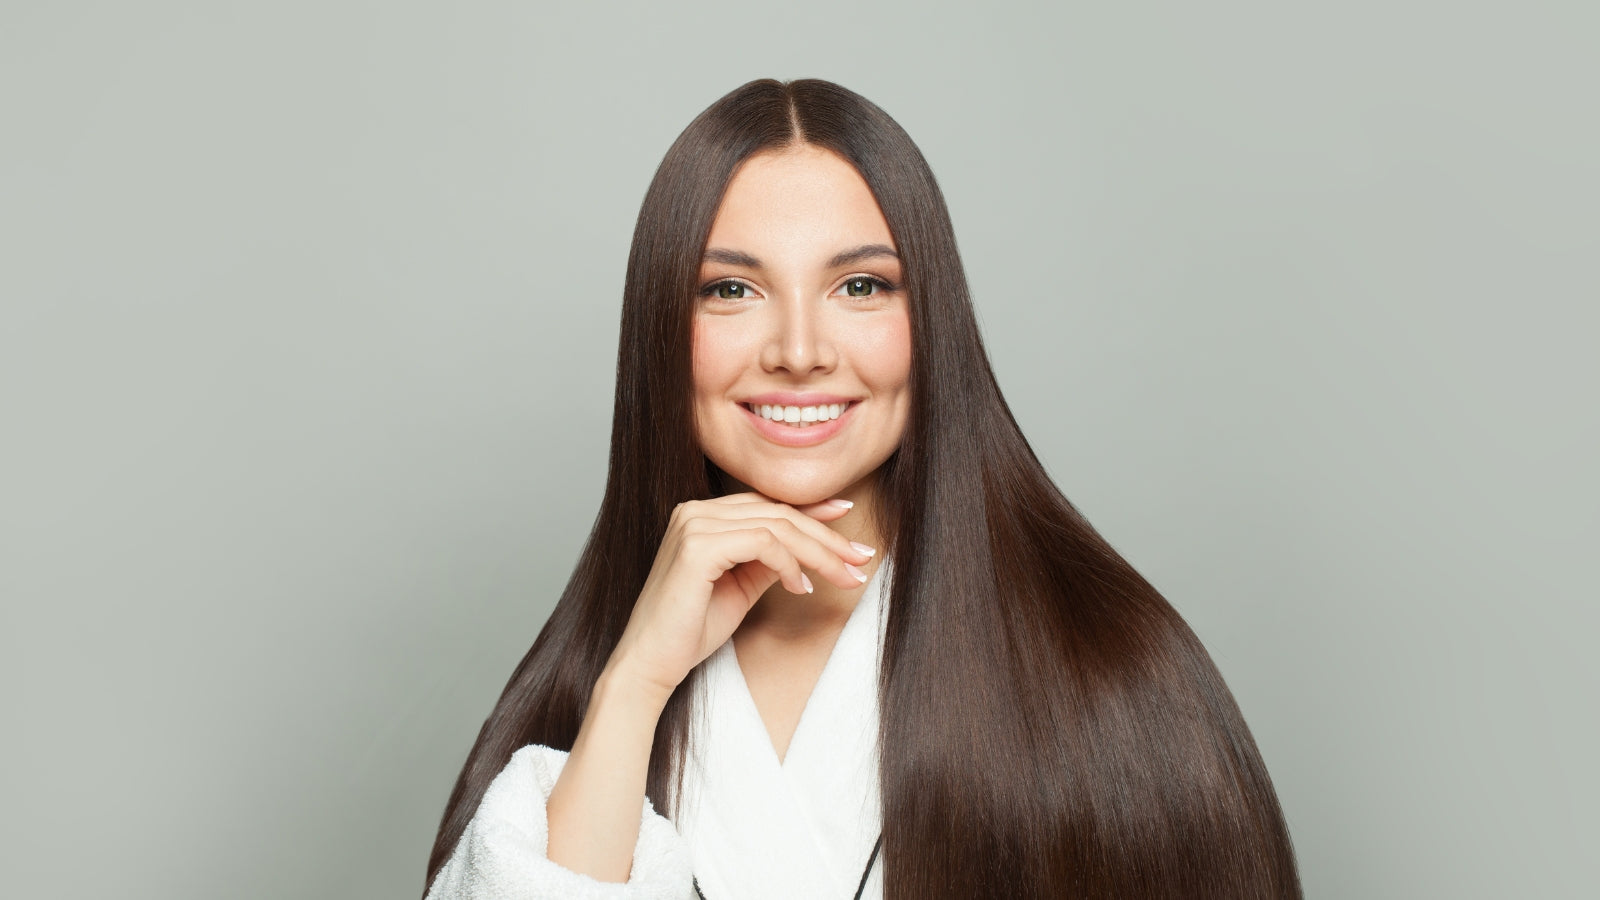 Woman with Long Hair Smiling